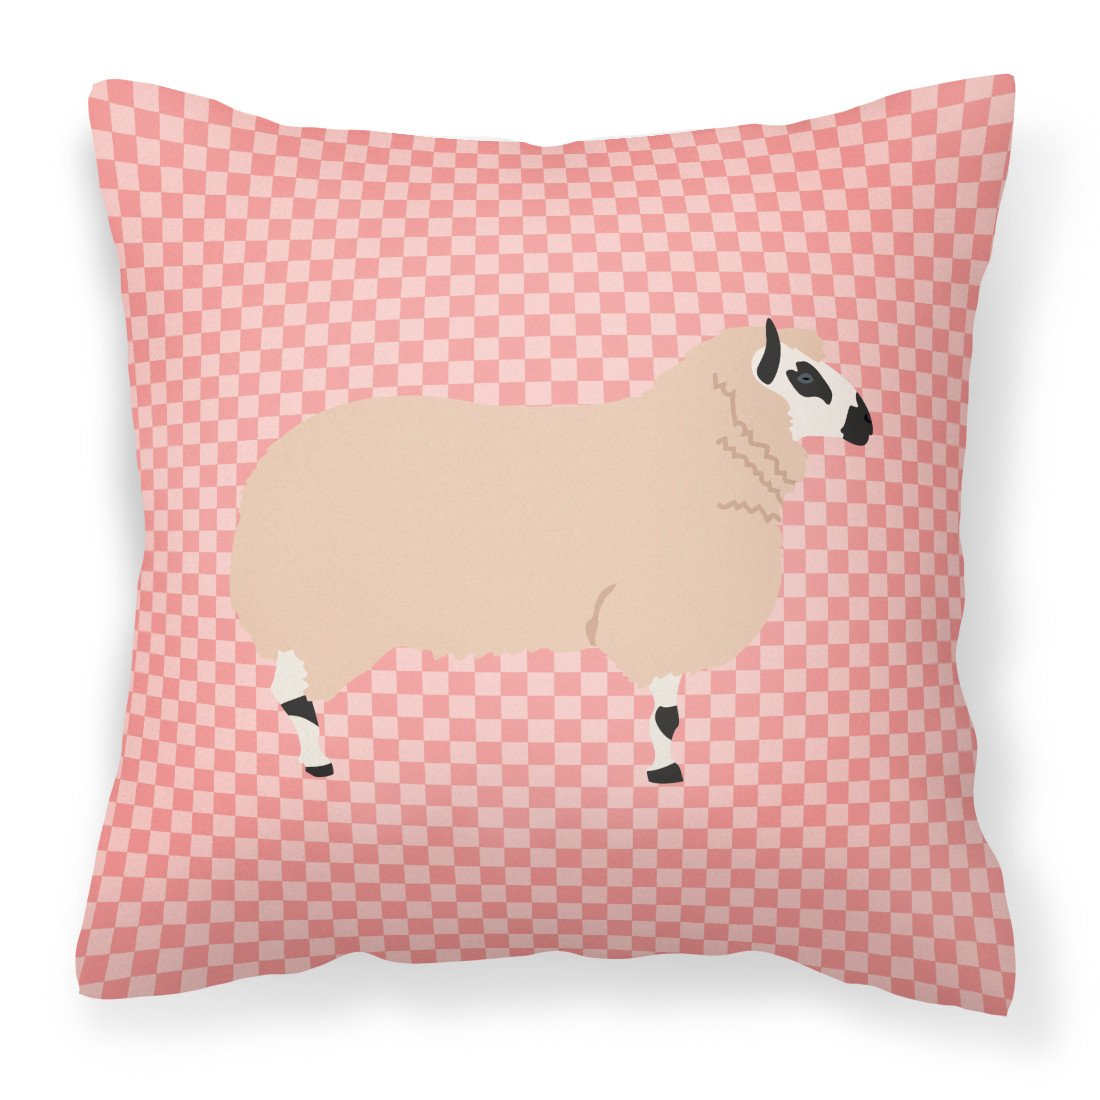 Kerry Hill Sheep Pink Check Fabric Decorative Pillow BB7979PW1818 by Caroline's Treasures